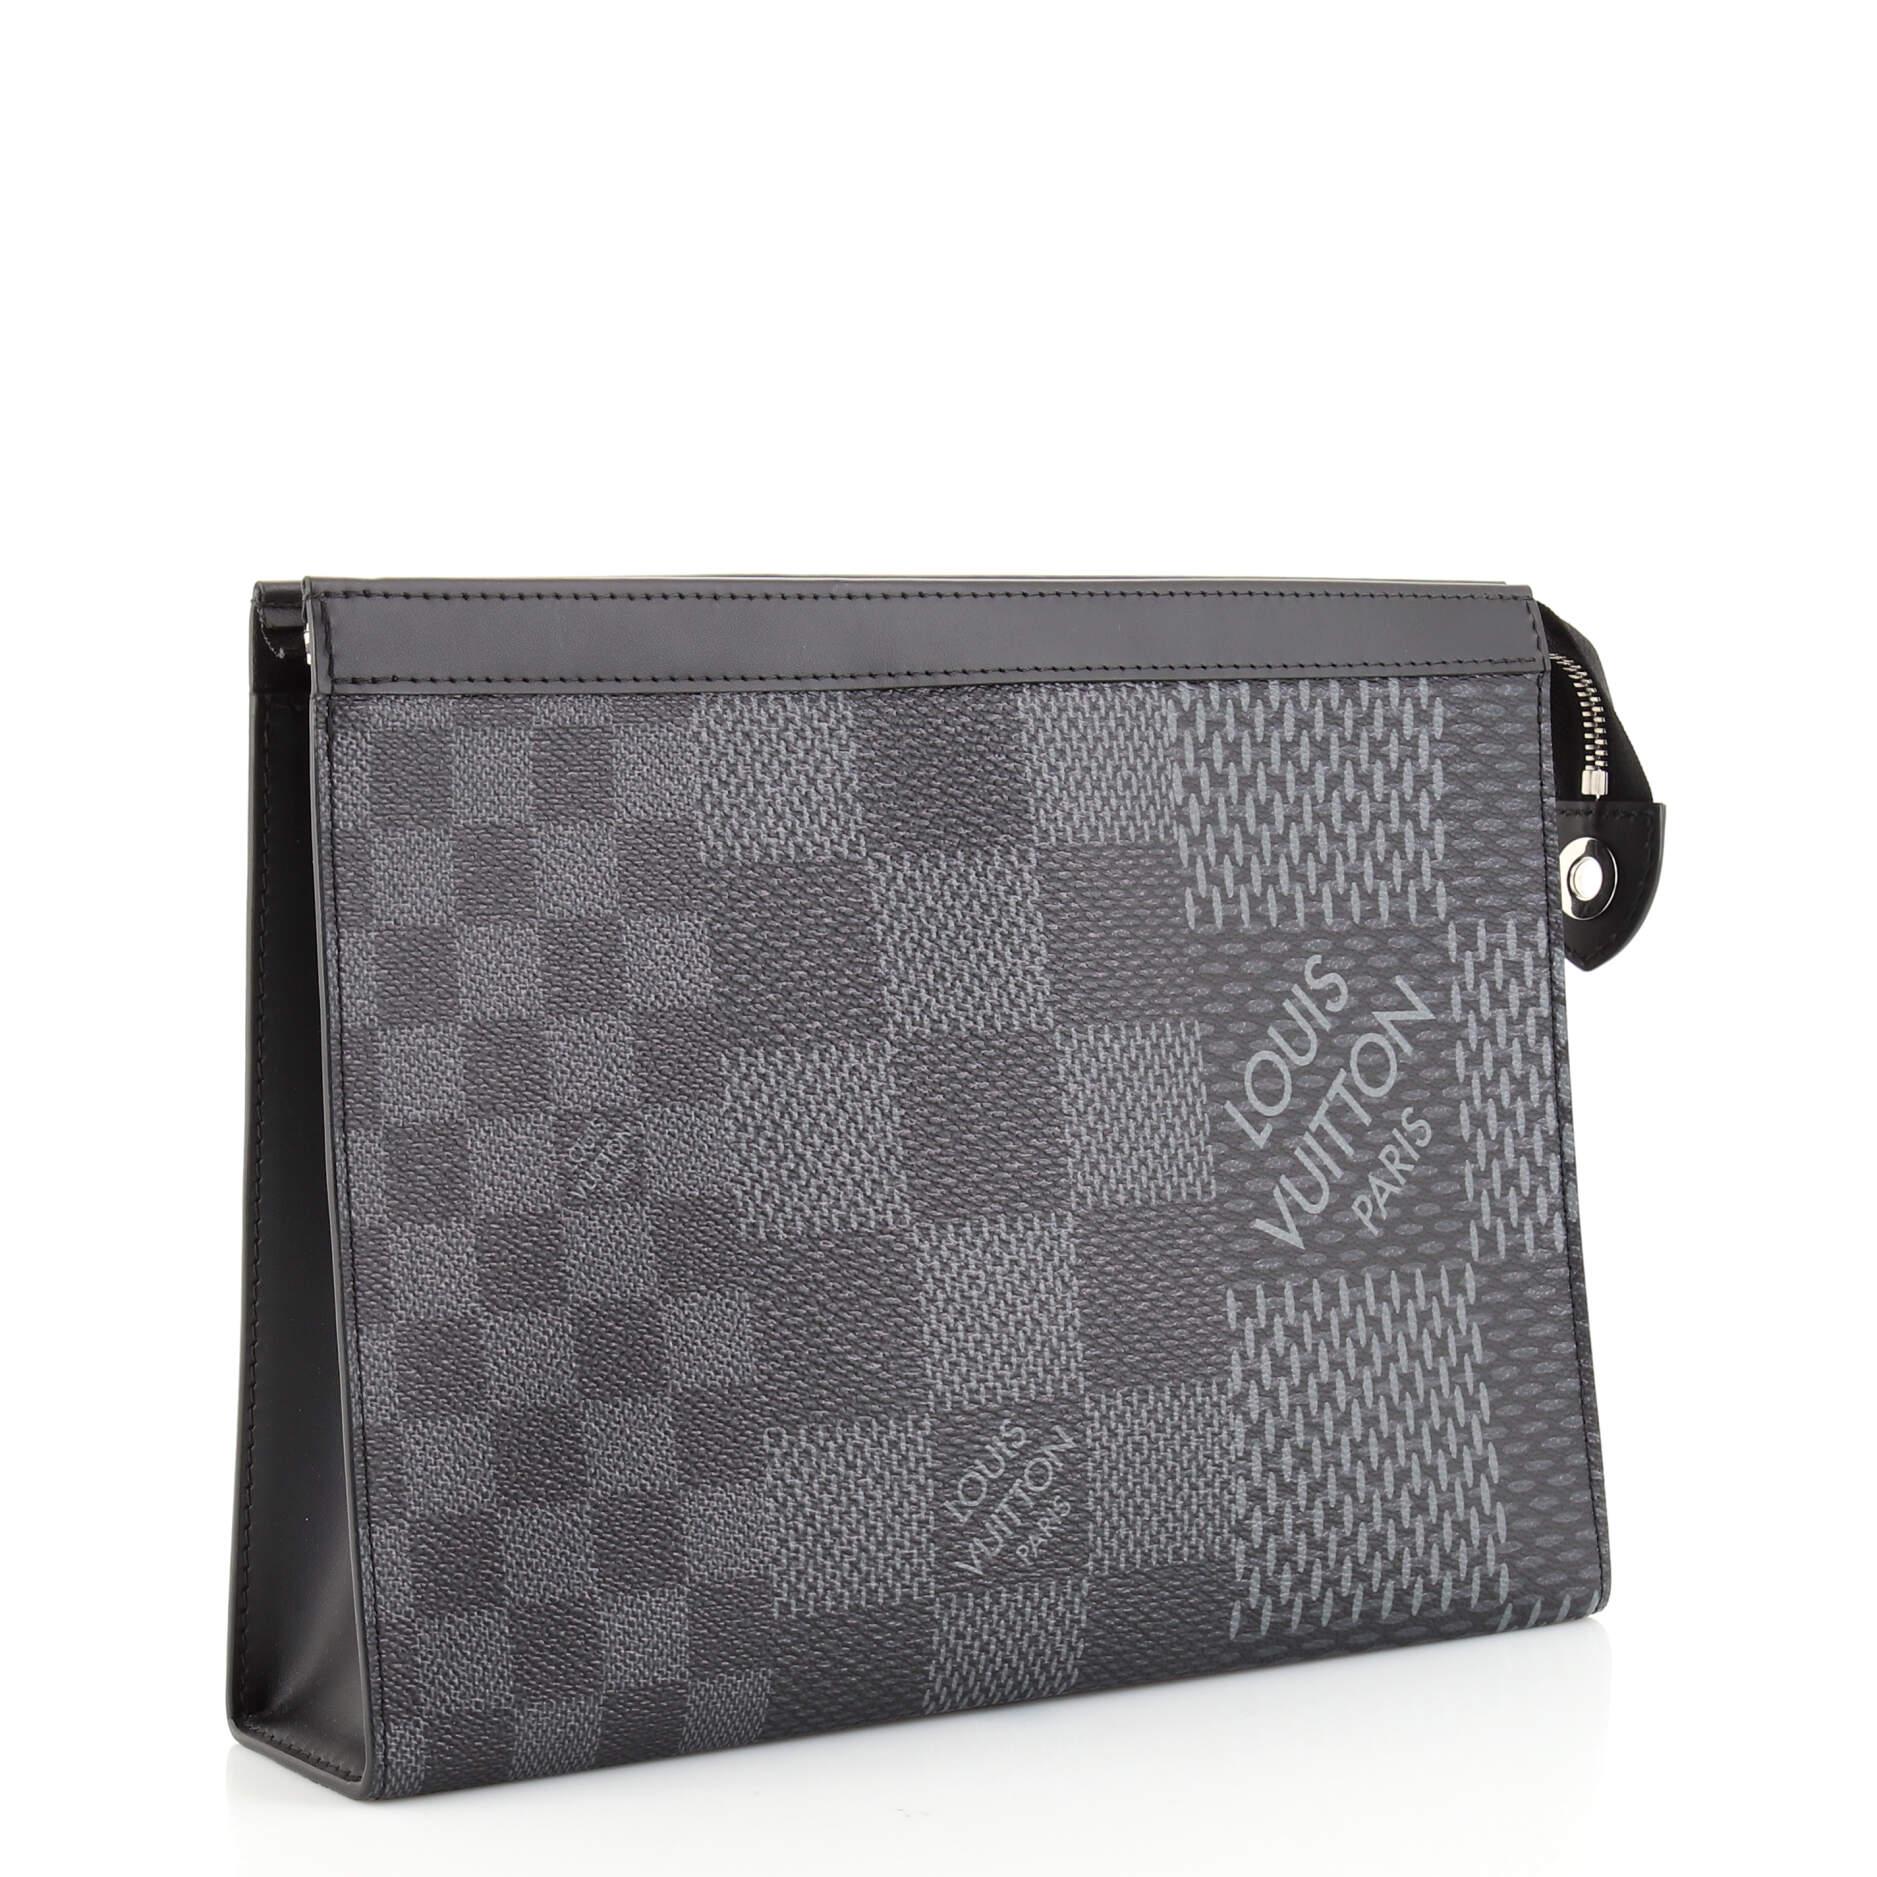 Preloved Louis Vuitton Giant Limited Edition Damier Graphite